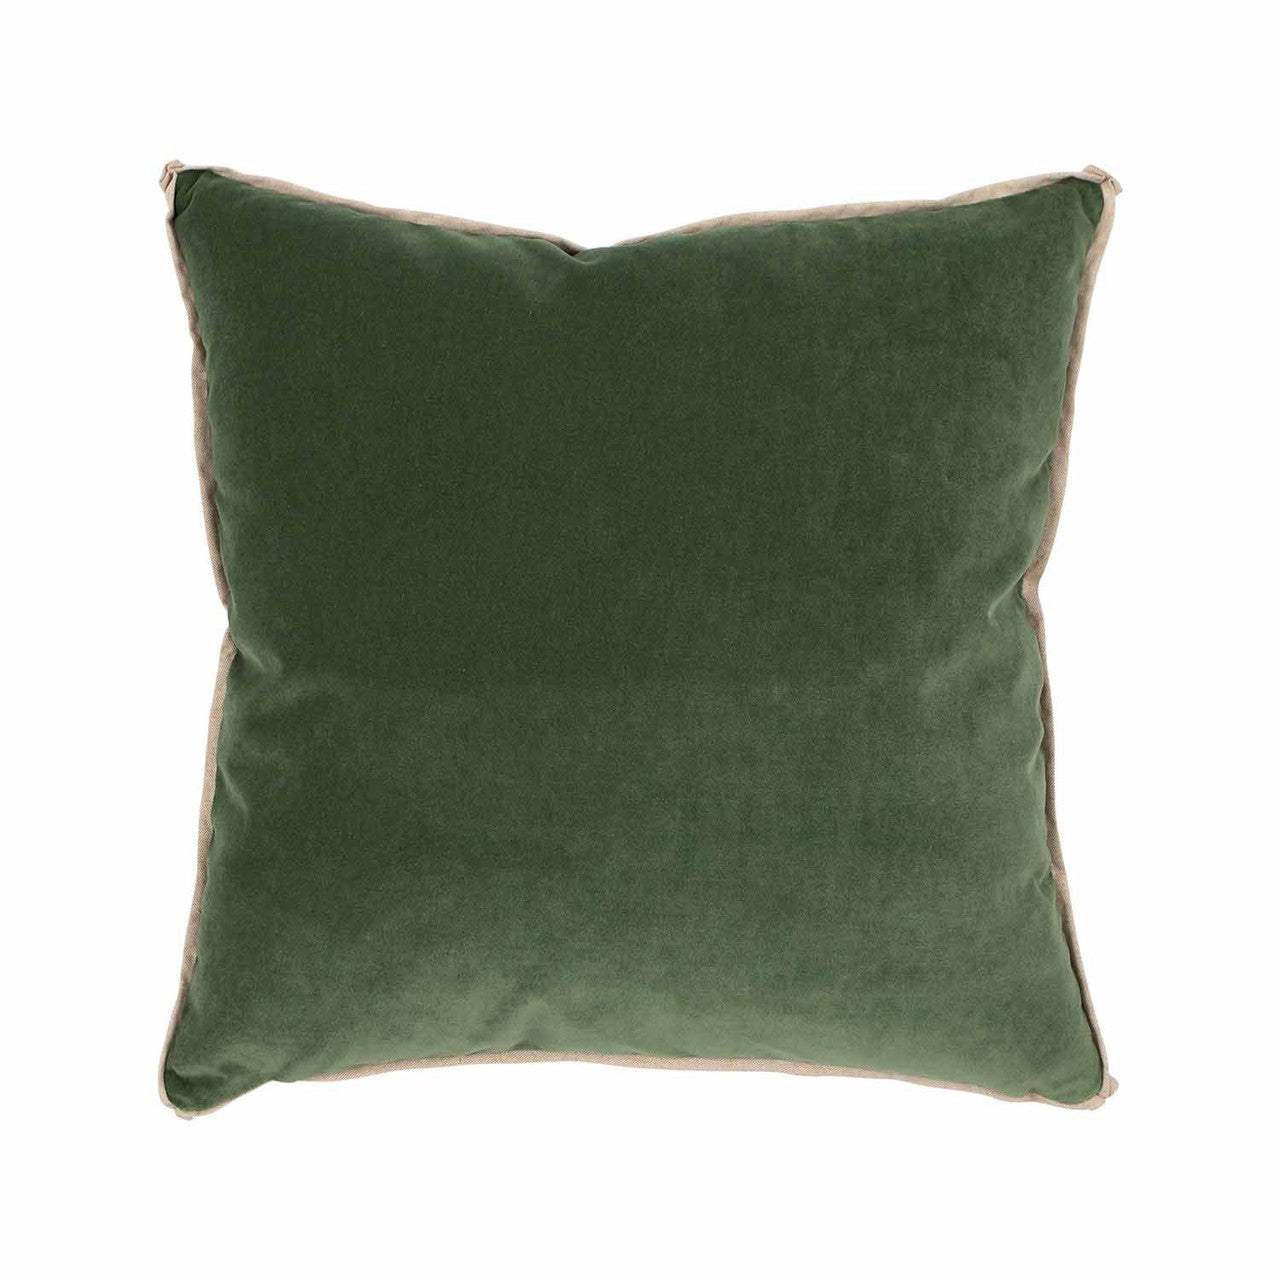 PILLOW BANKS (Available in 5 Colors)